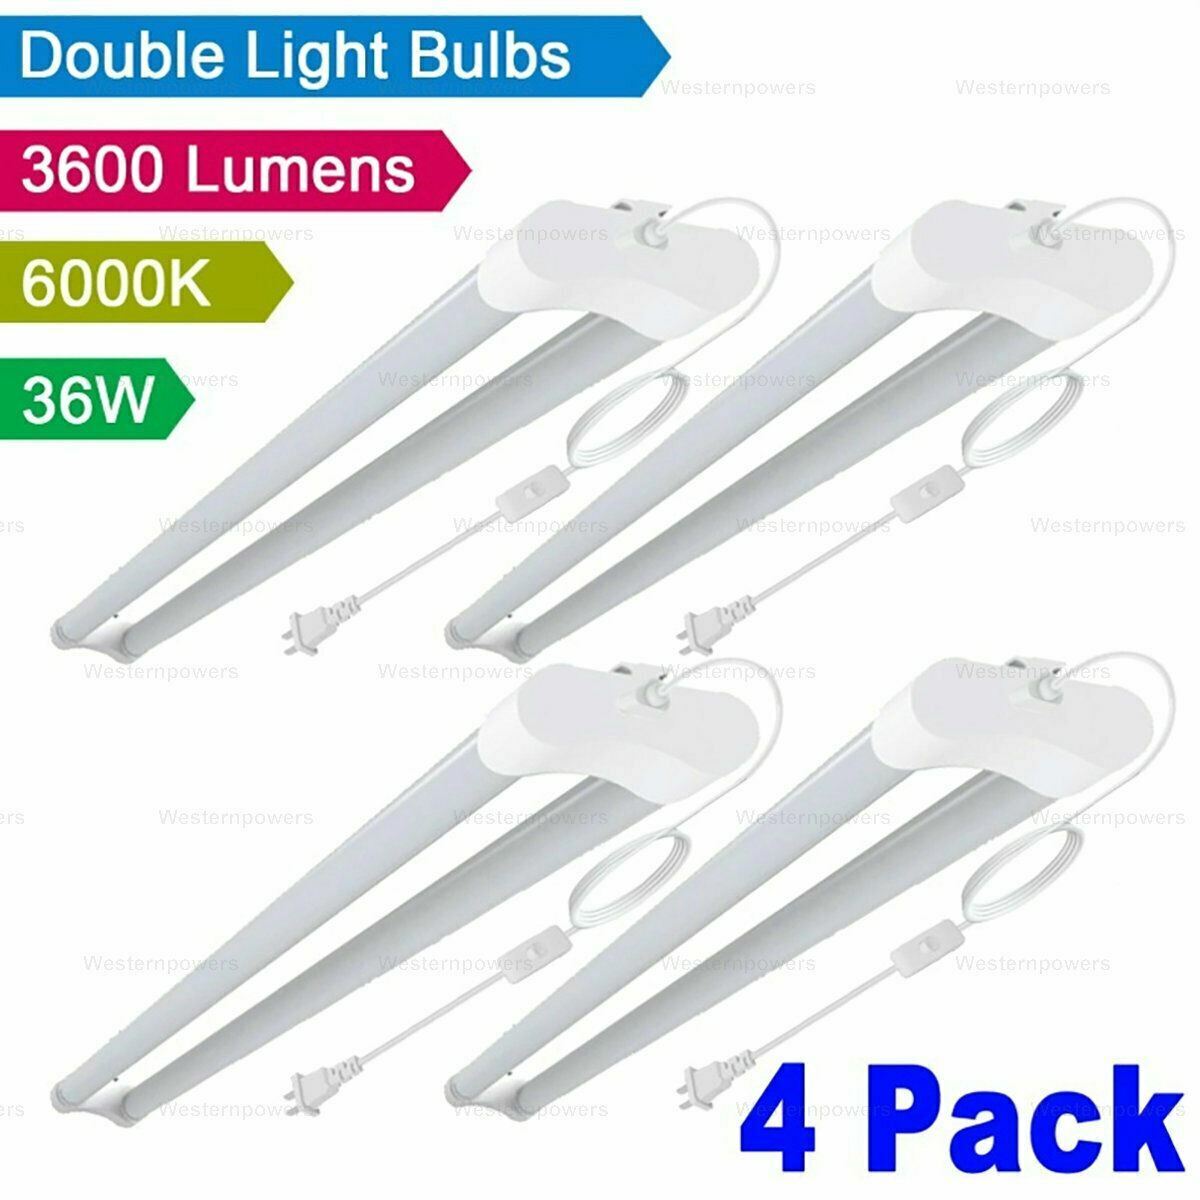 4x Westernpowers 36W LED Shop Light Fixture Work Garage Light 6000K White 4FT westernpowers Does Not Apply